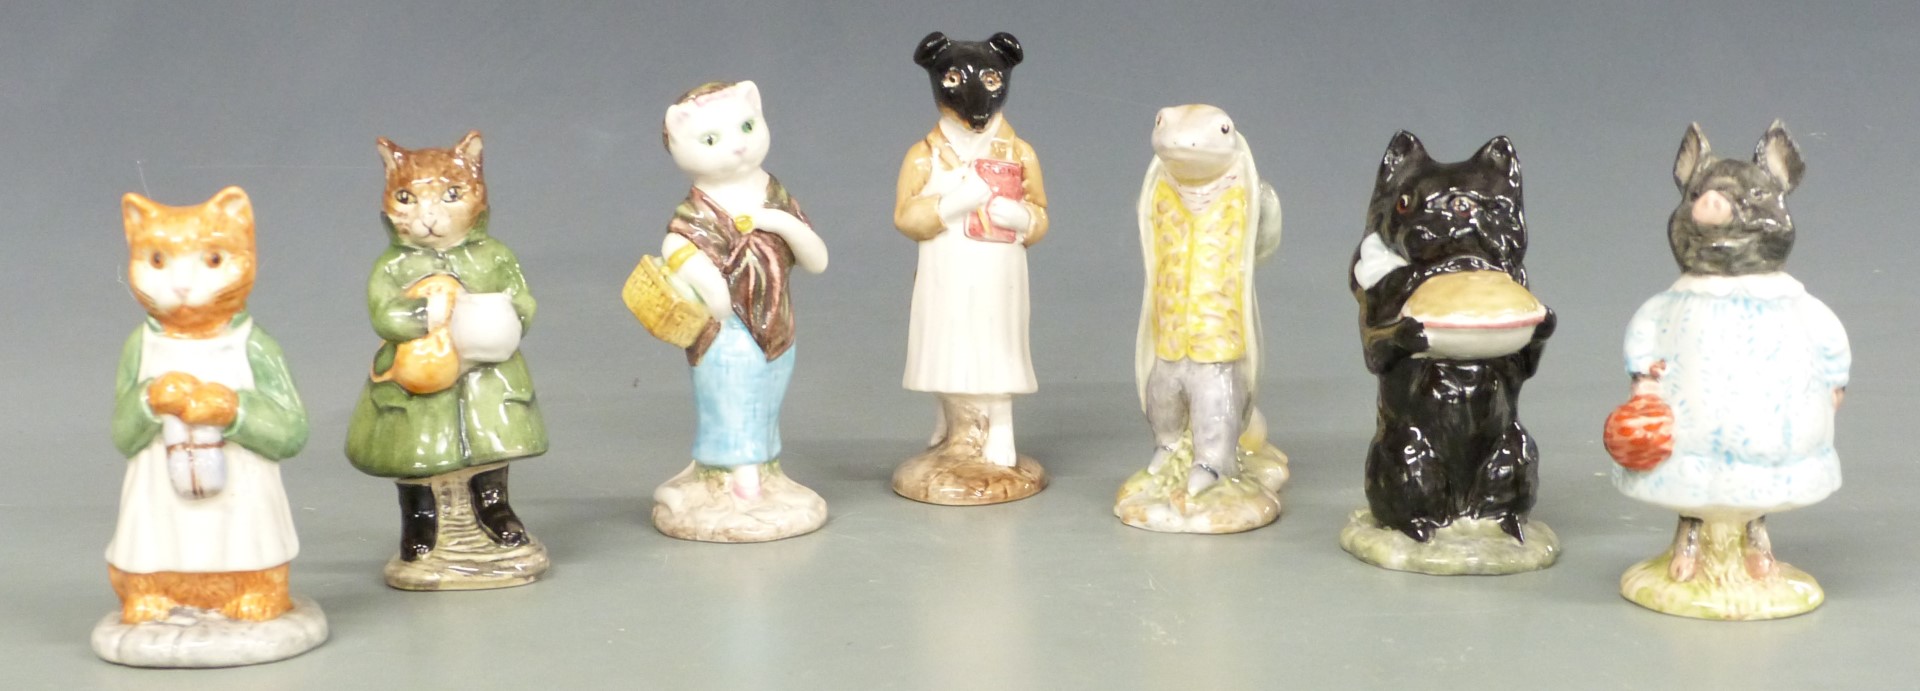 Seven Beswick Beatrix Potter figures including Susan, Duchess with Pie, Ginger, Pickles, Sir Isaac